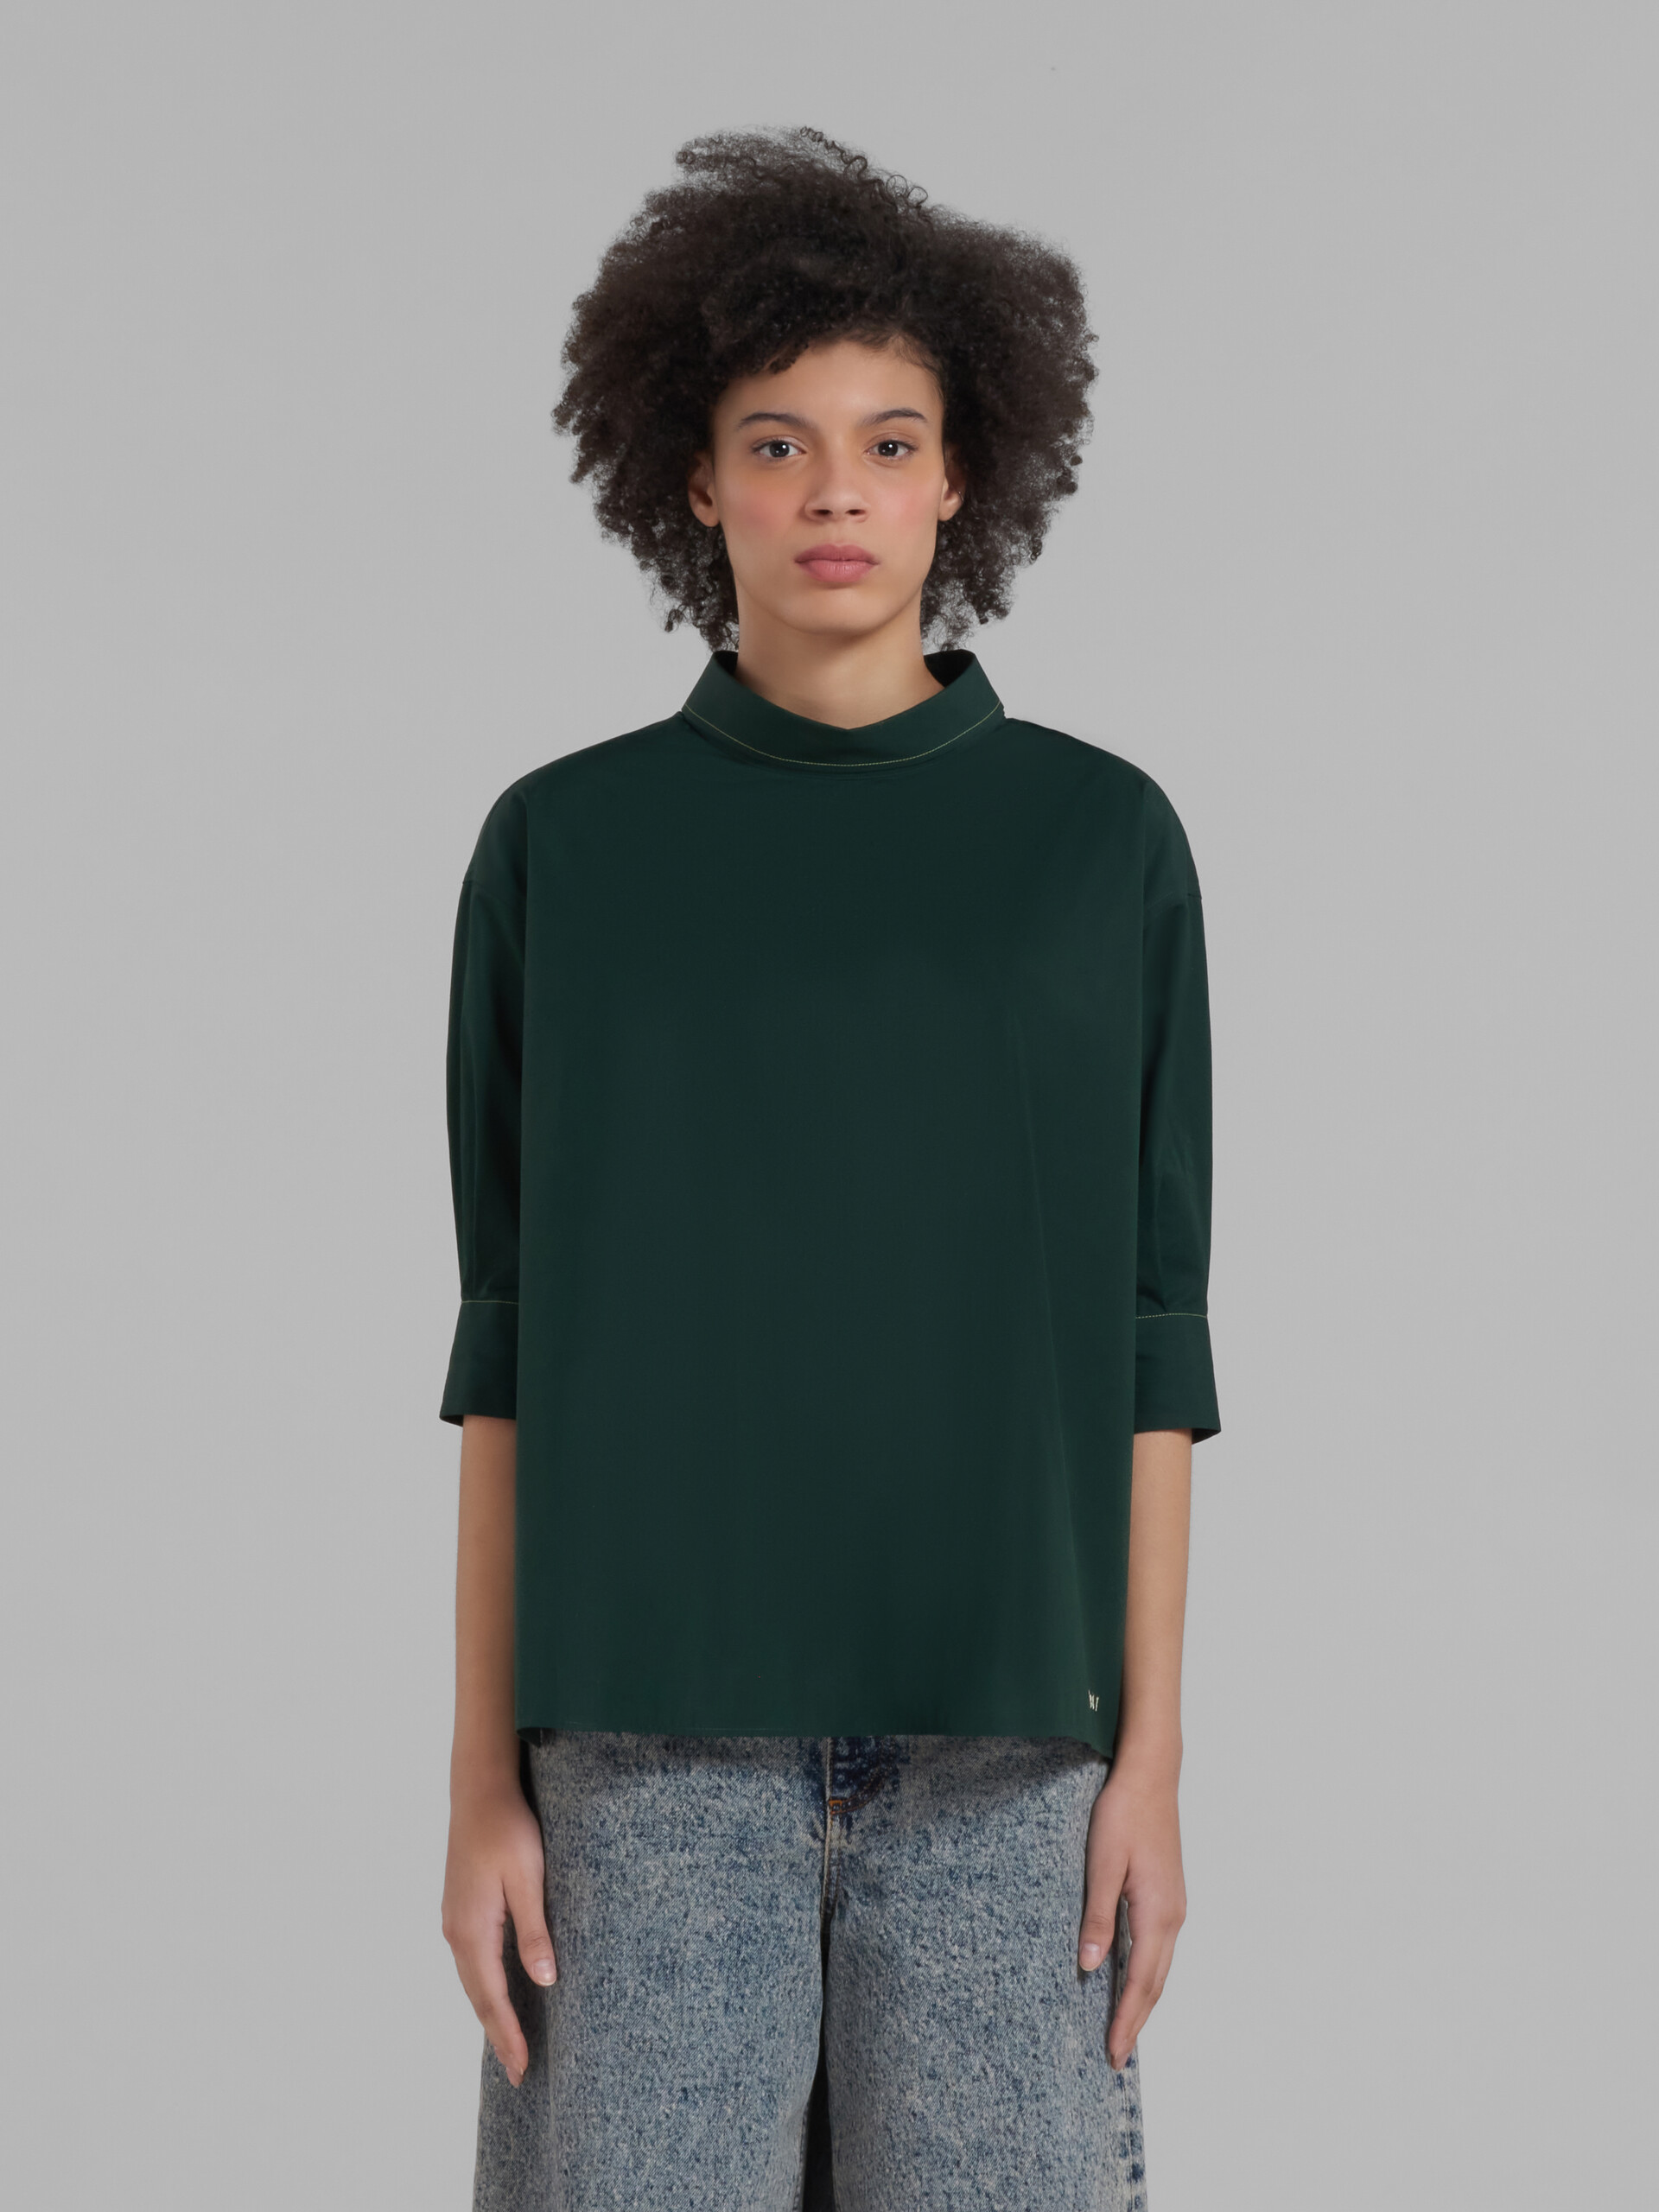 Green organic poplin top with open back - Shirts - Image 2